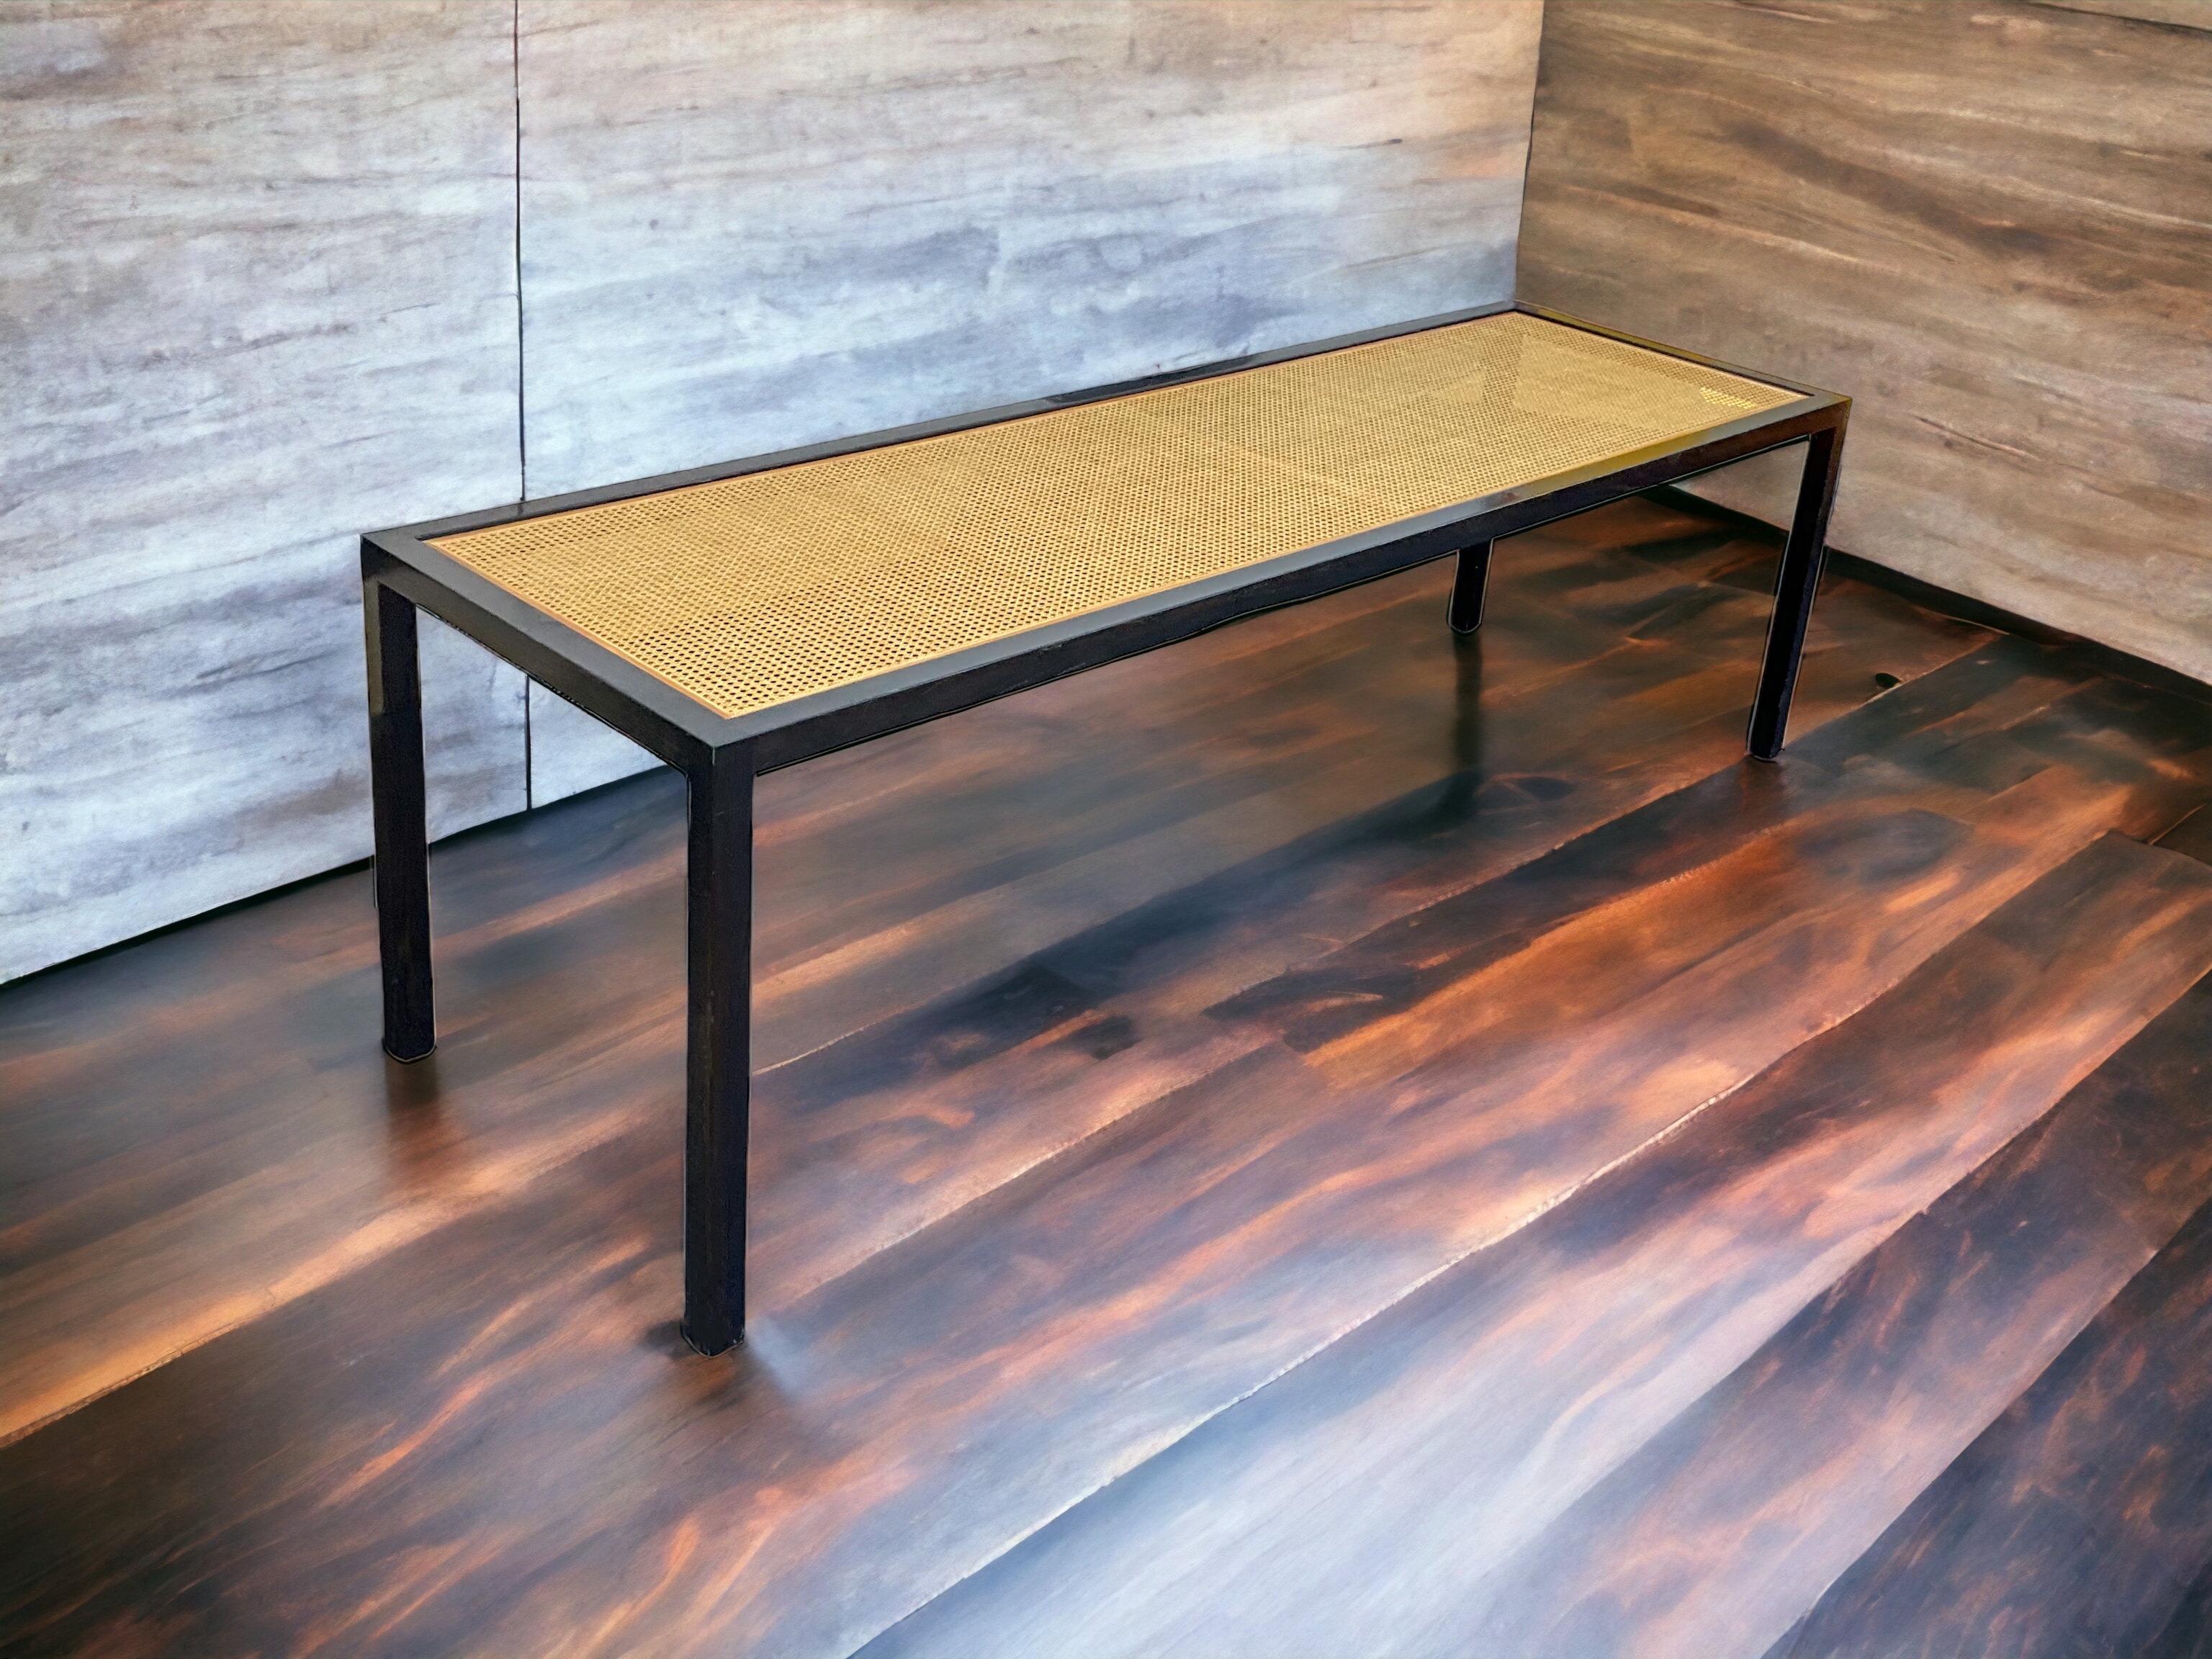 20th Century Organic Modern Glass & Cane Top Danny Ho Fong Style Dining Table / Desk  For Sale